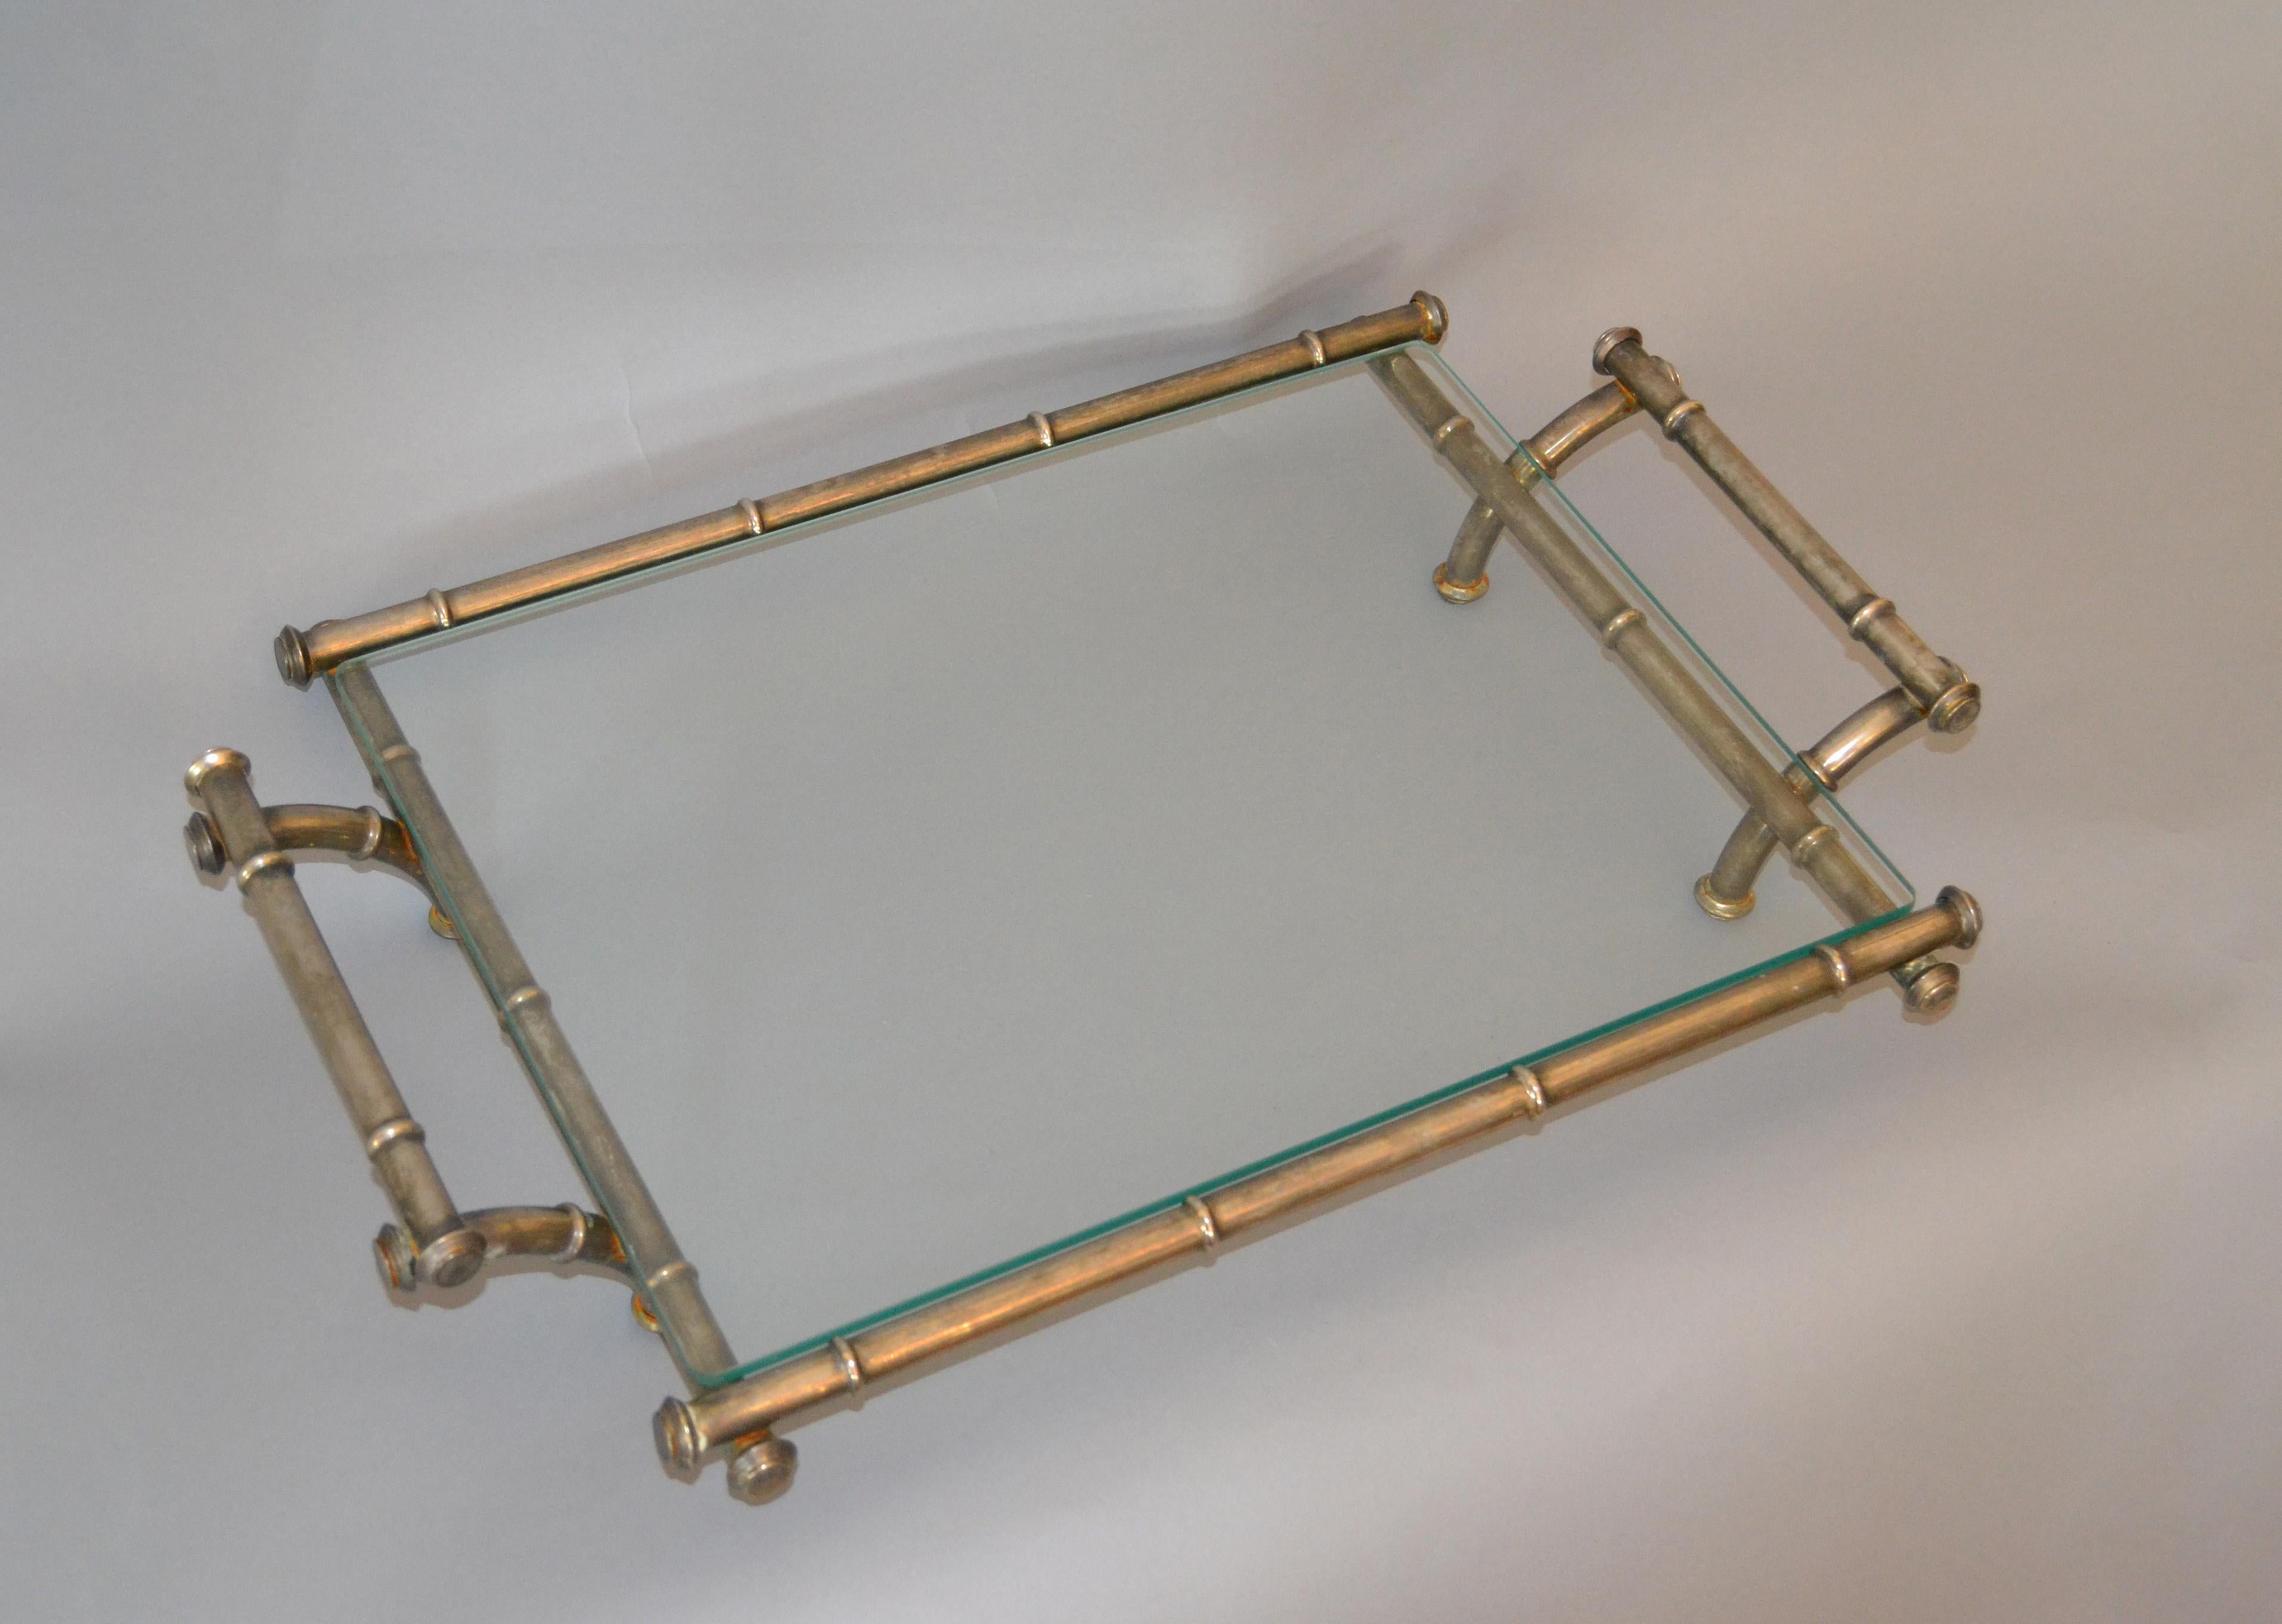 Late 20th Century Hollywood Regency Faux Bamboo Metal and Glass Table Tray, Serving Tray, Platter